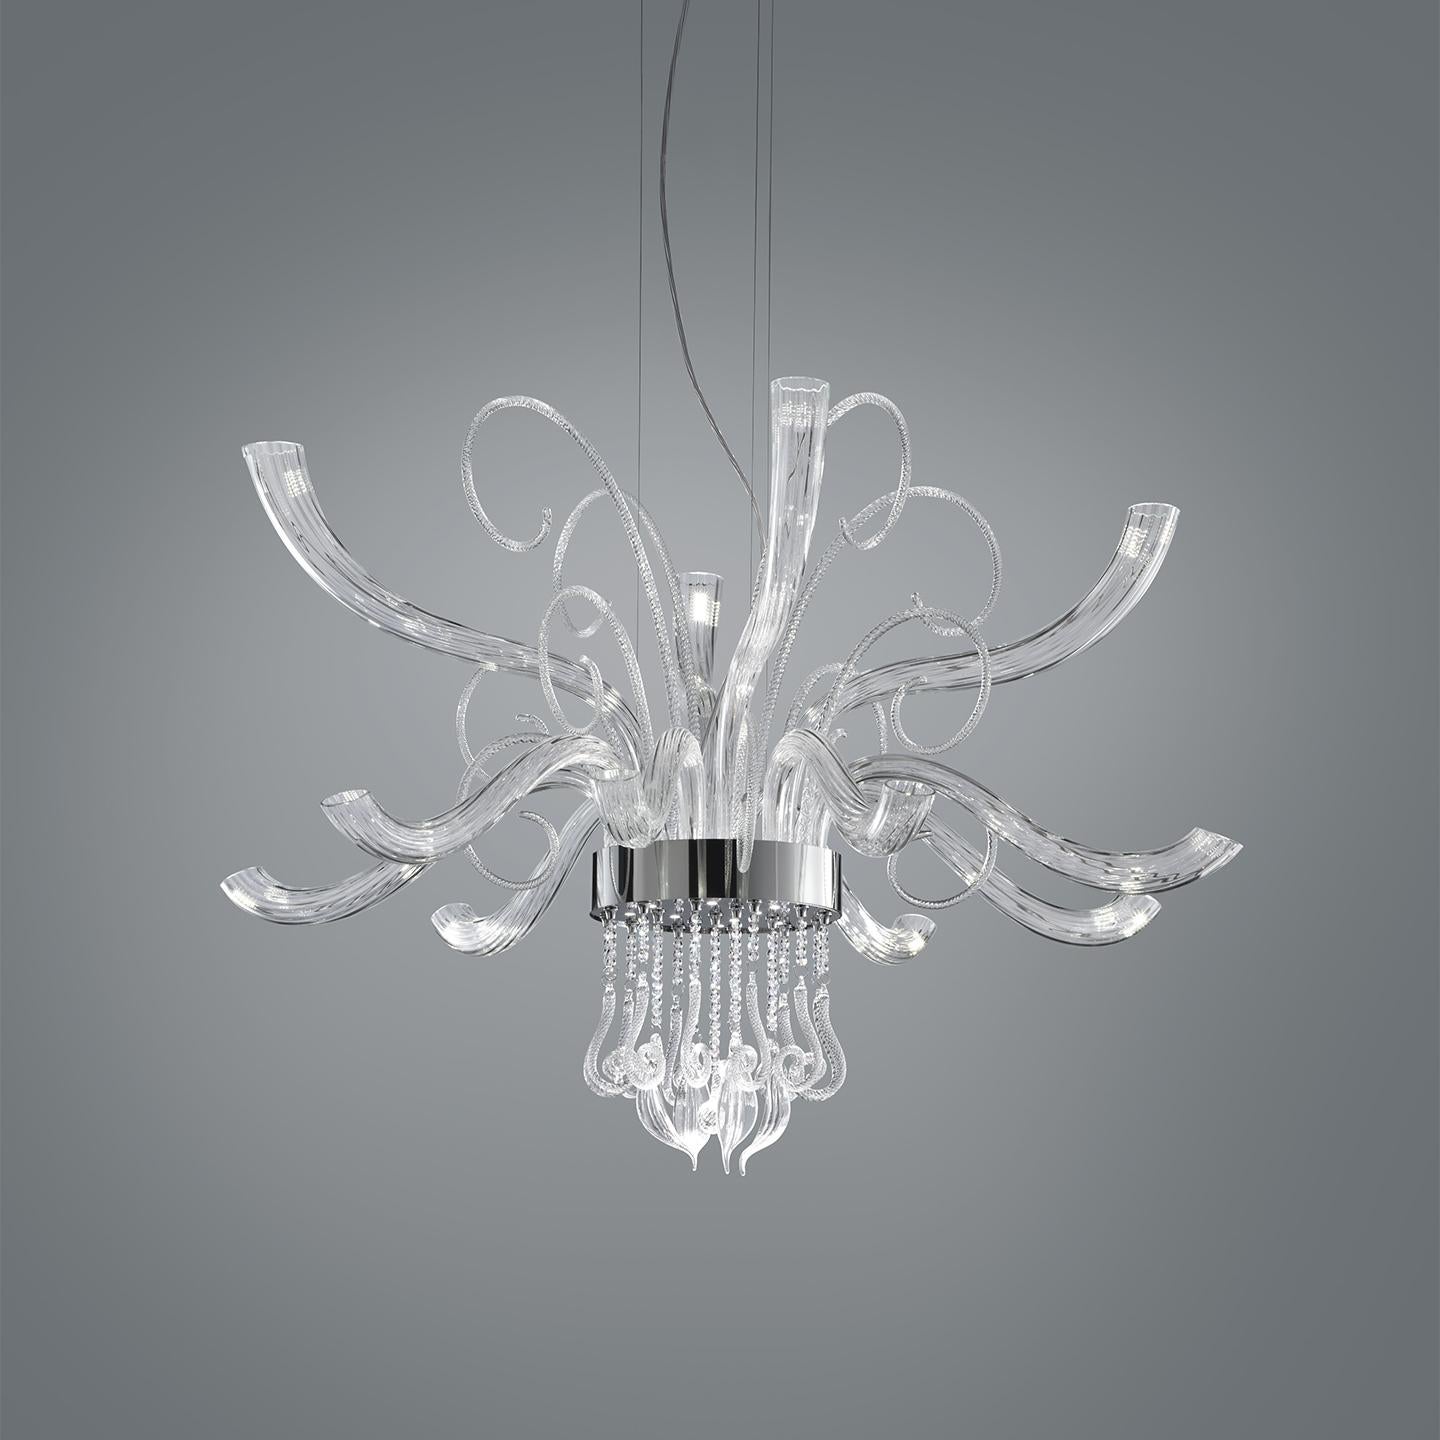 The Elysée chandelier evokes the traditional style of a Murano chandelier, but with a modern twist. Designed by Marina Toscano, Elysée is composed of translucent, hand blown Italian glass tendrils that break out into sculptural, LED-illuminated